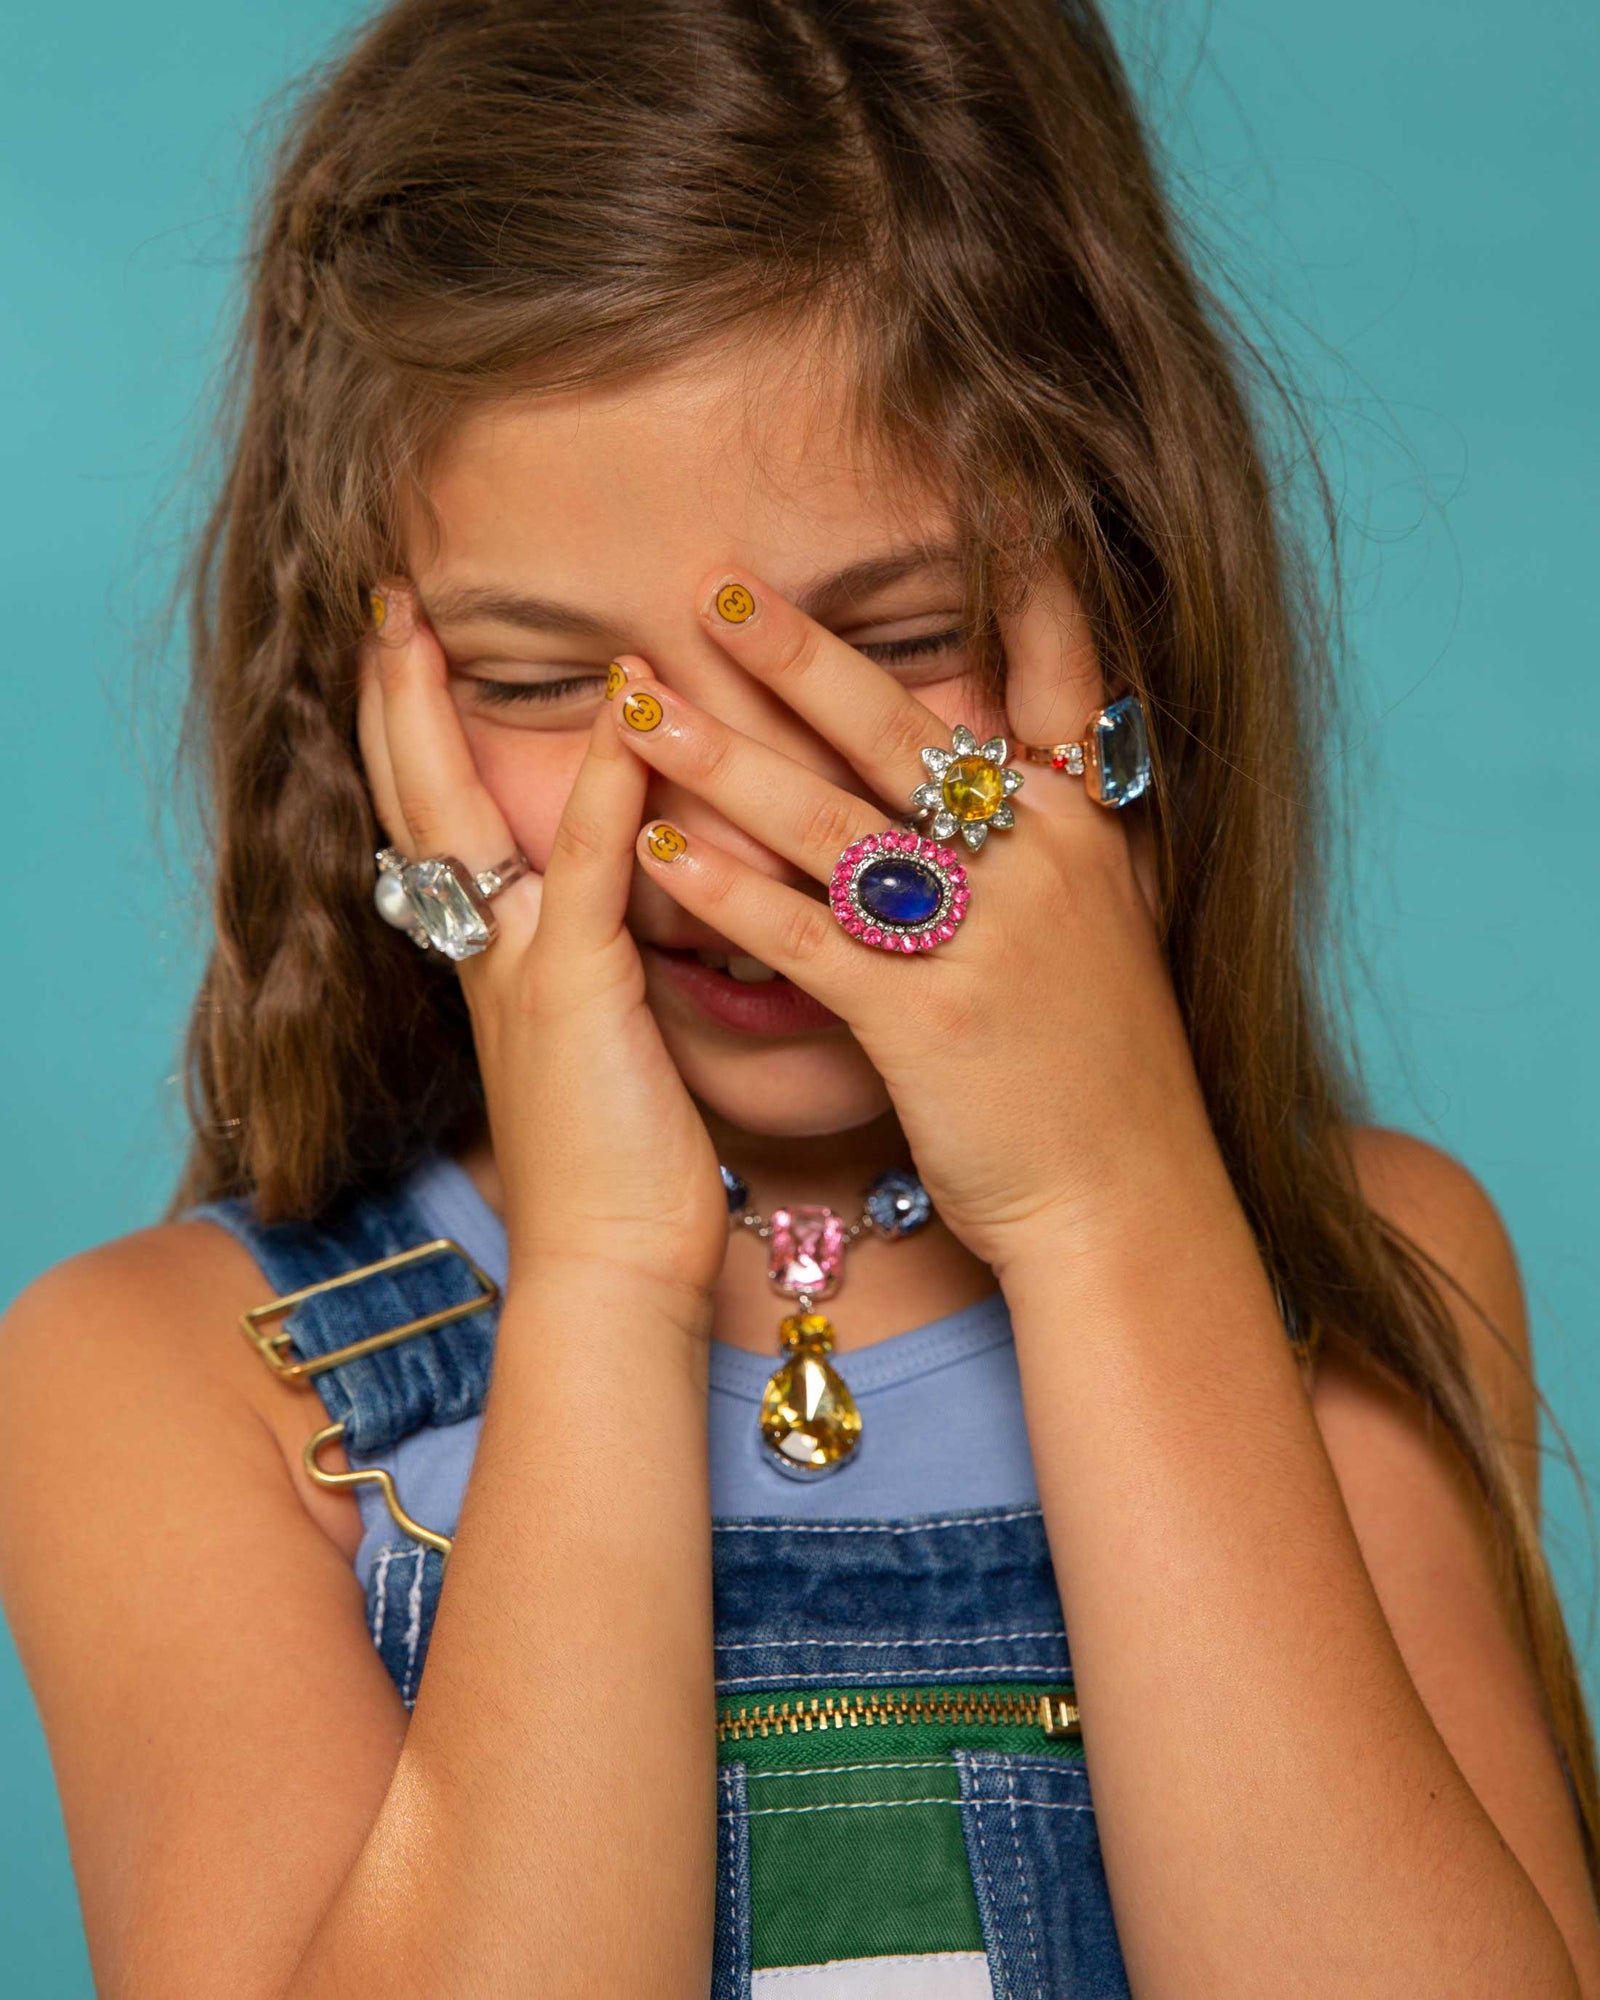 Me Time (Double!) Kids' Mood Rings – Super Smalls